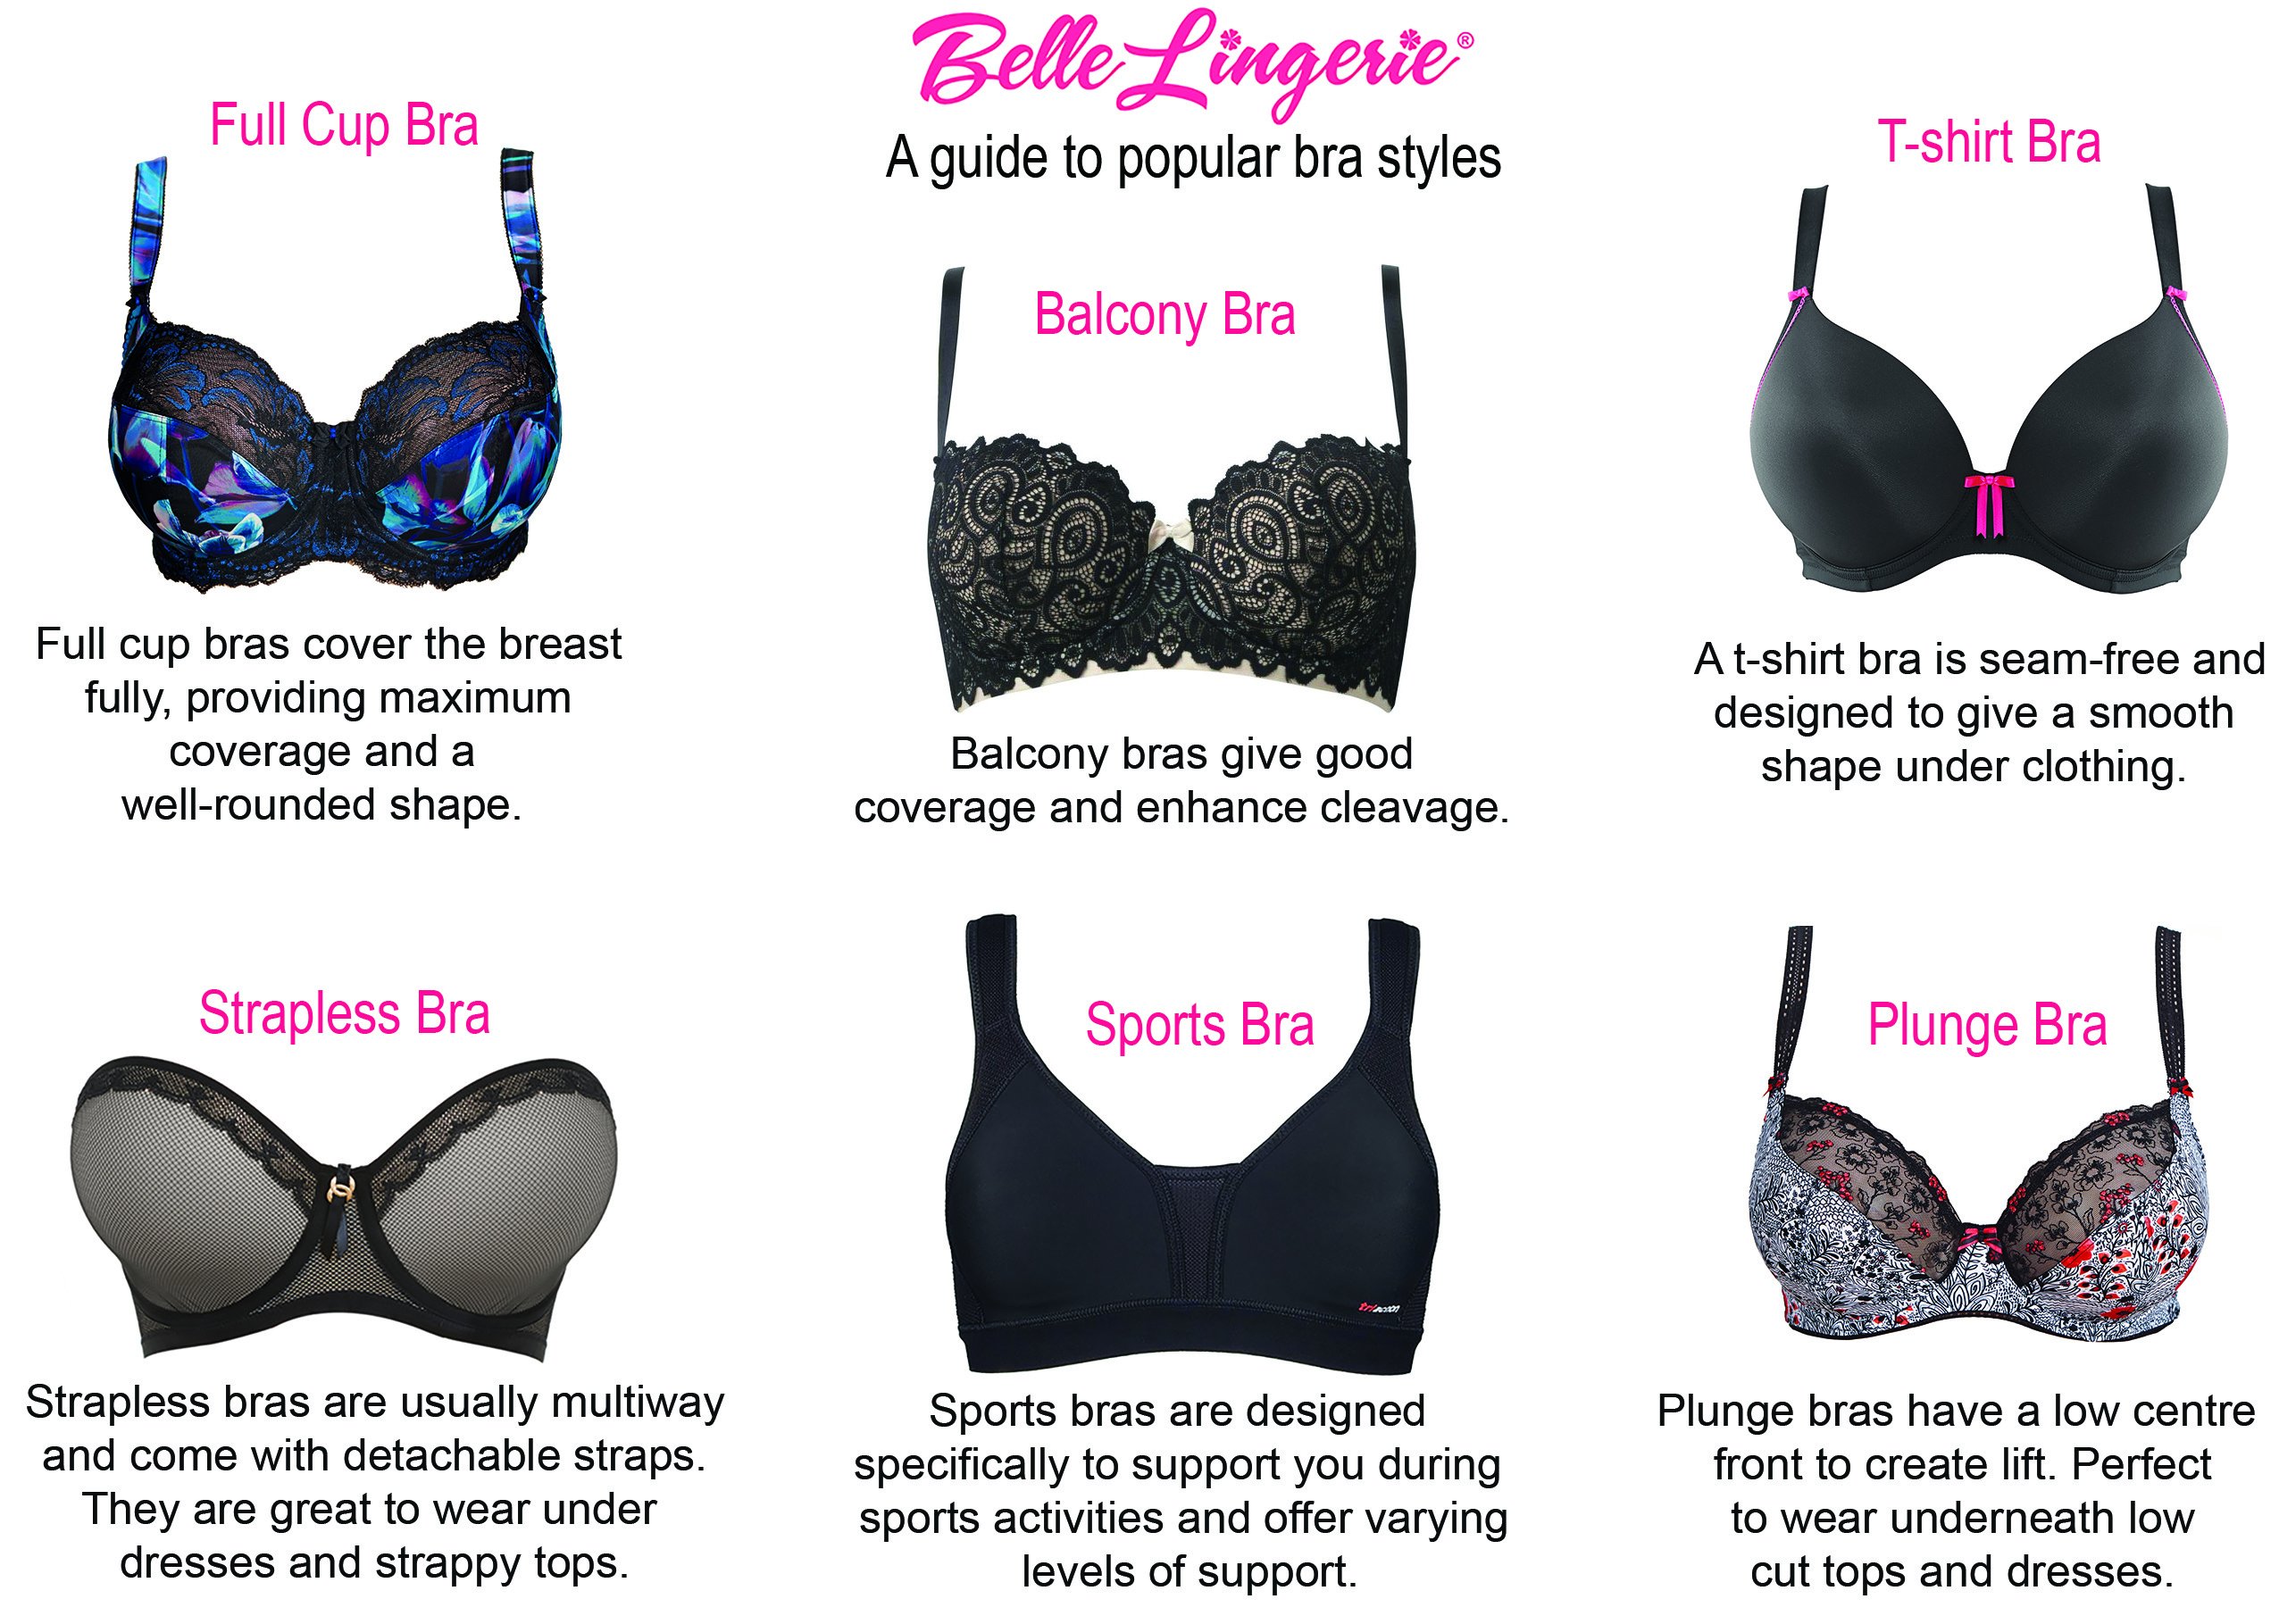 Belle Lingerie on X: For those of you who ask what #bra styles